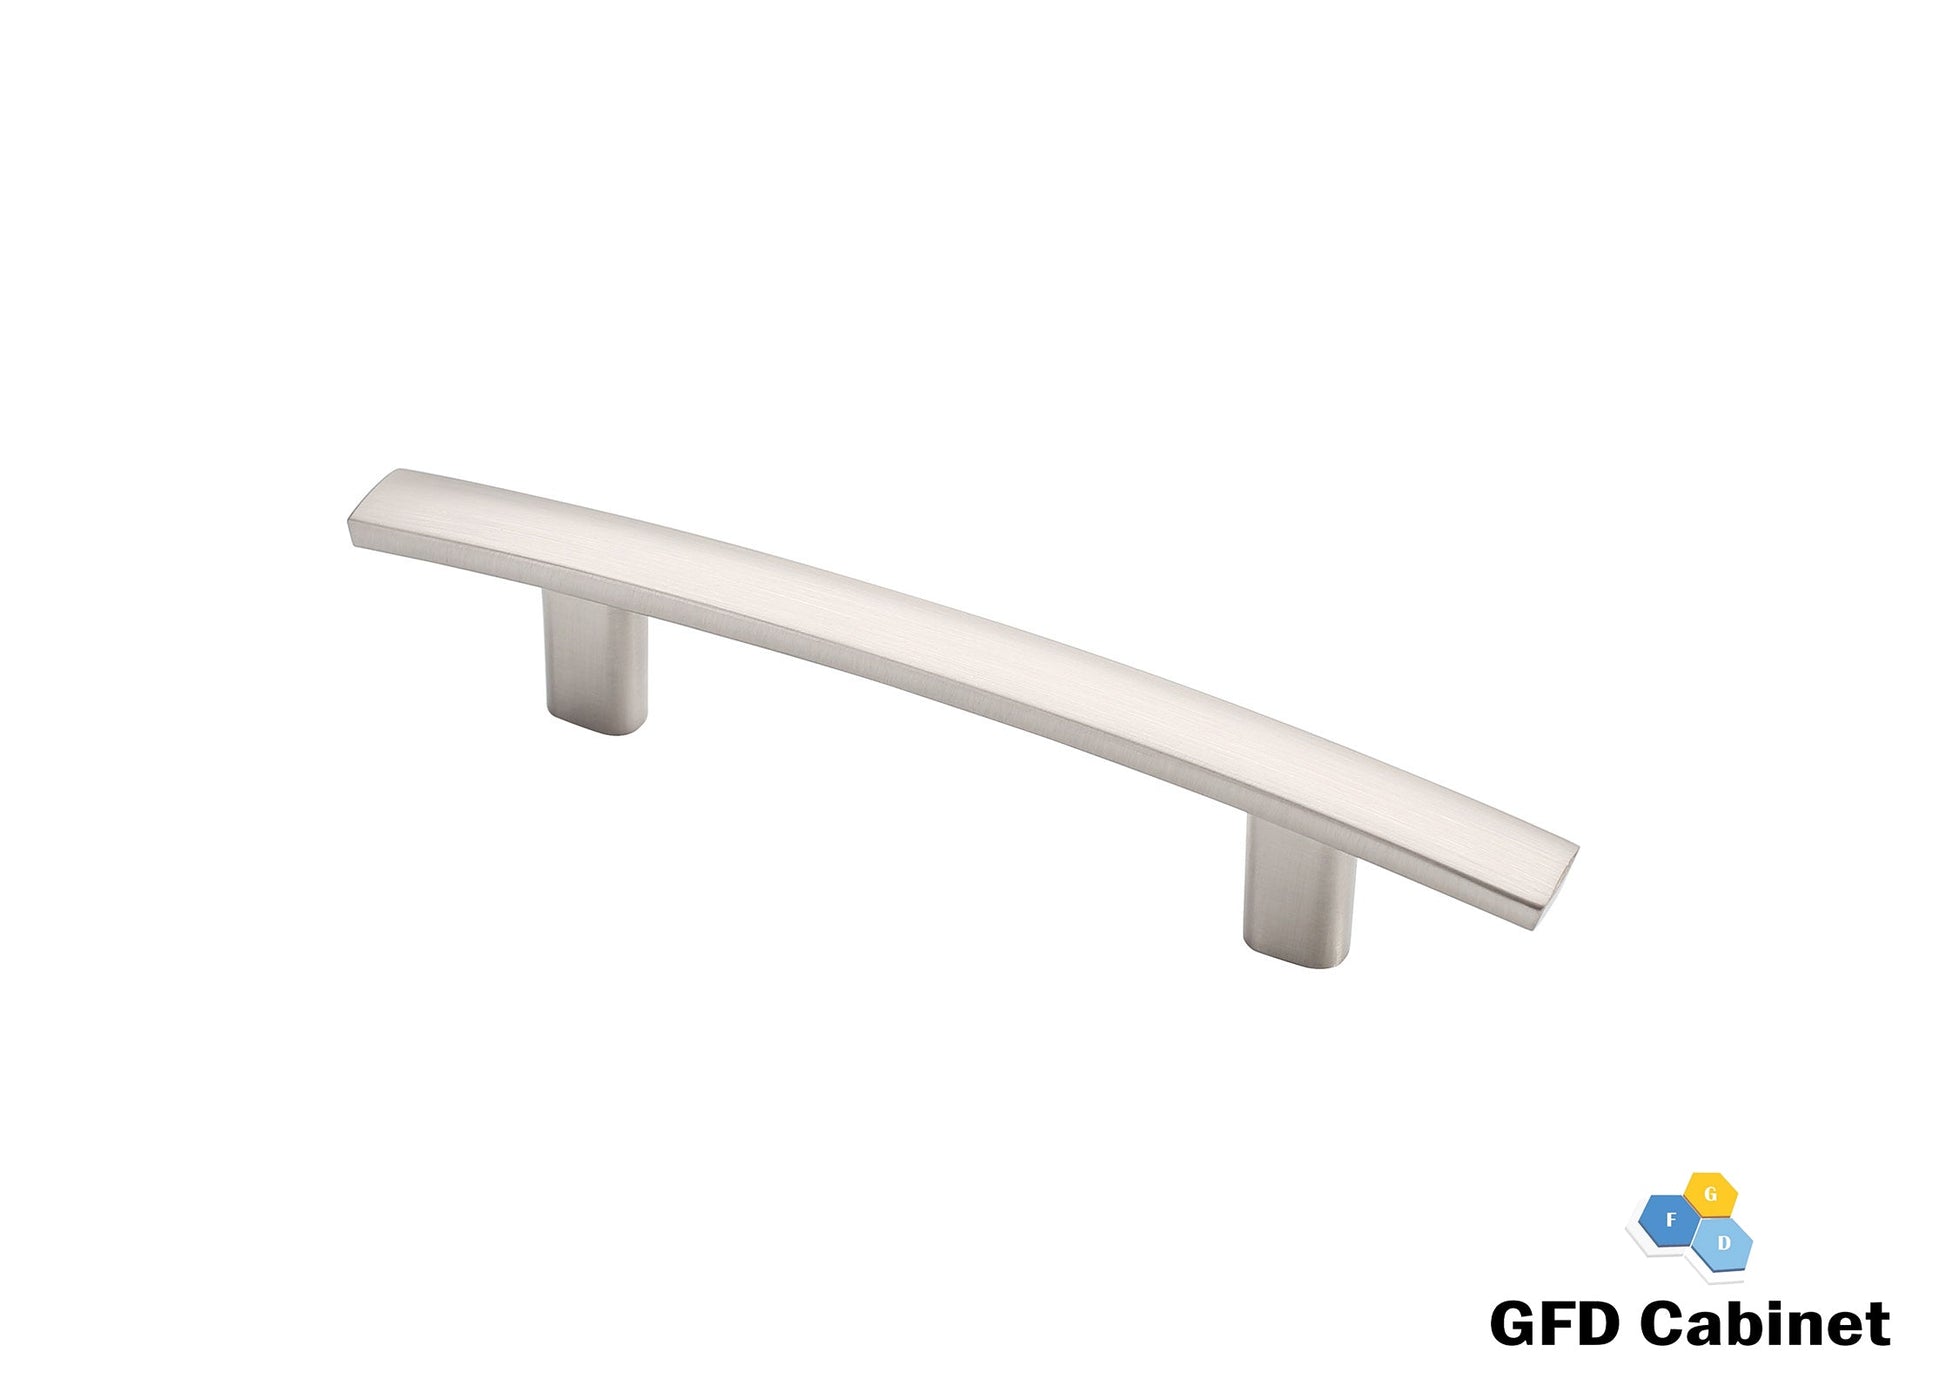 H-3046-128 5-1/16 in. (128 mm) Center-to-Center Cabinet Arched T-Bar Pull Handle